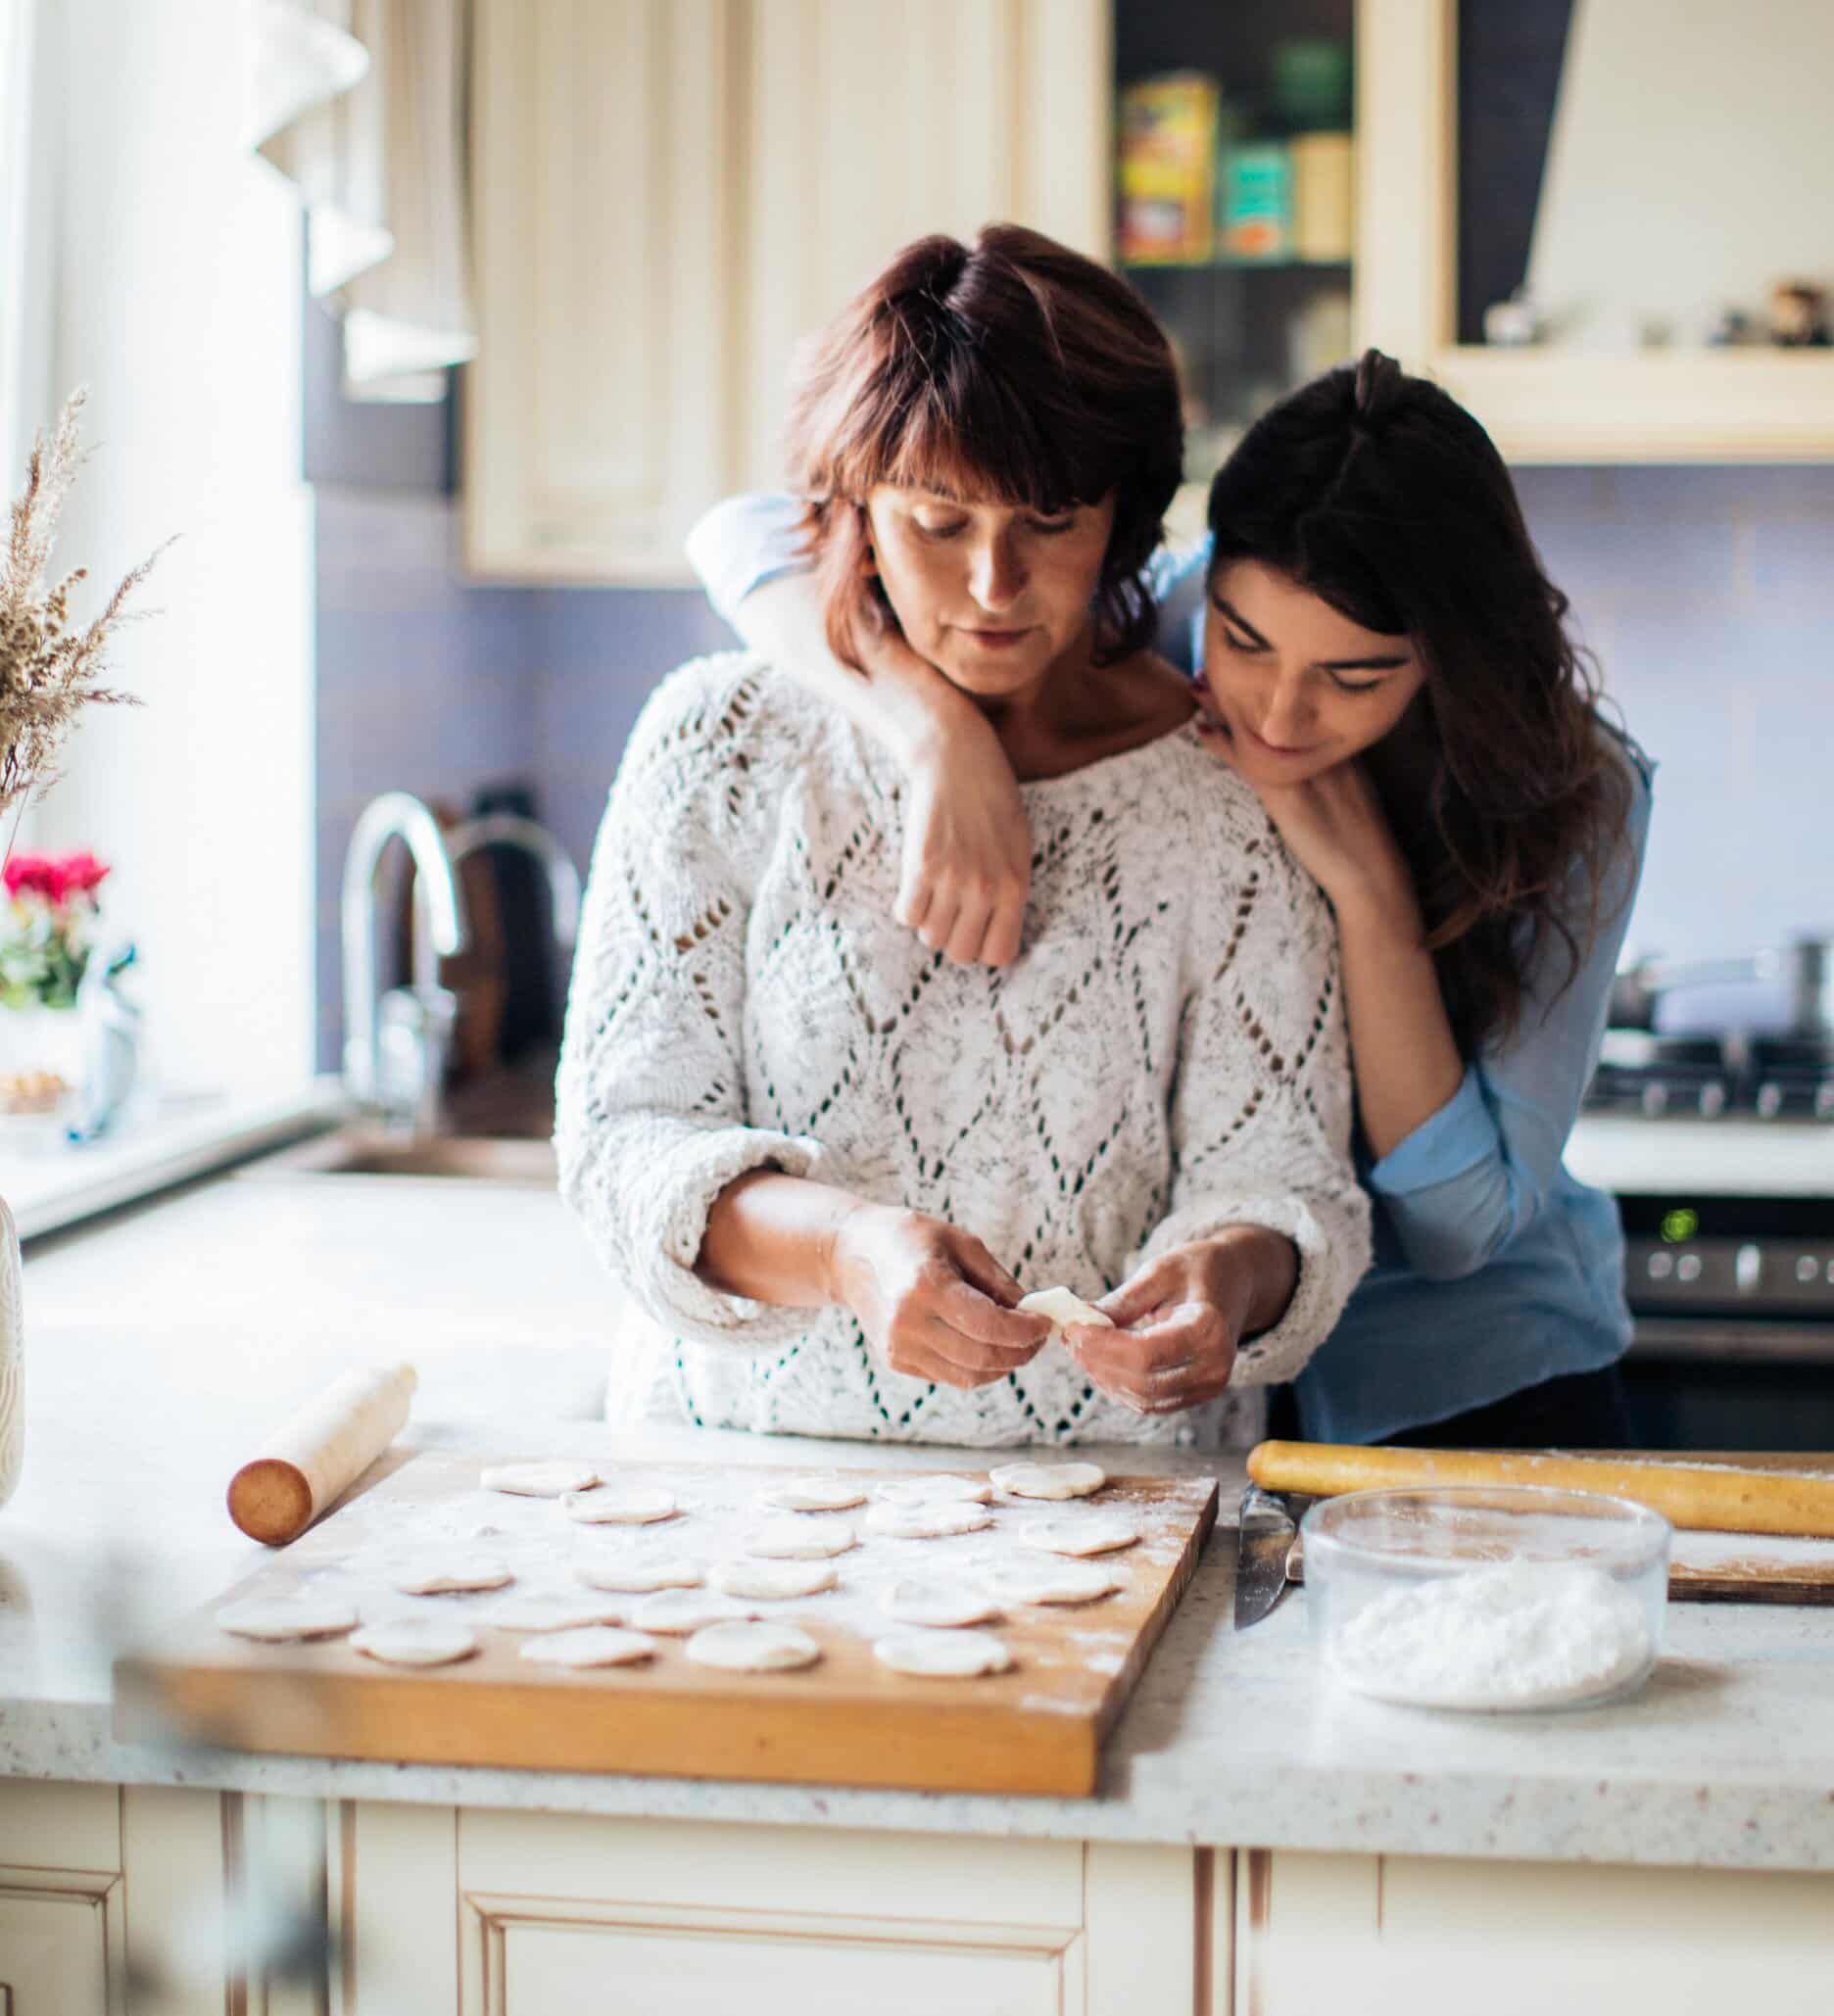 A lady stood in the kitchen making some cakes, her daughter is stood behind her smiling as her mother has started tinnitus counselling.